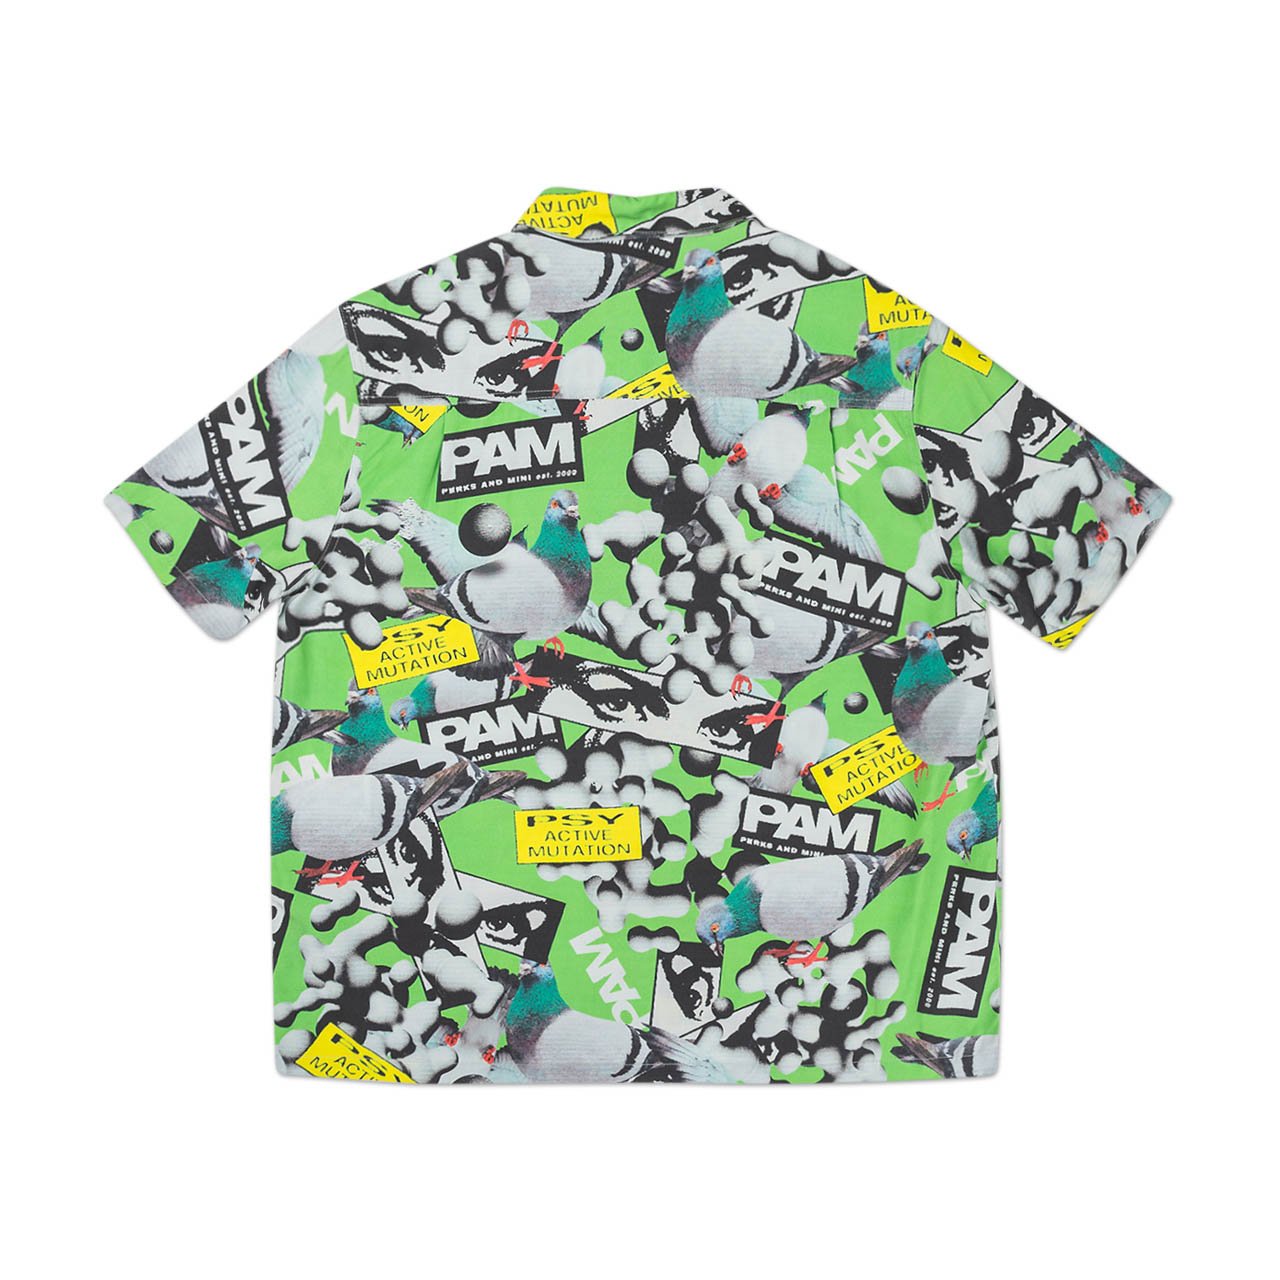 perks and mini collage short sleeve shirt (green) - 3597-cpdg - a.plus - Image - 2